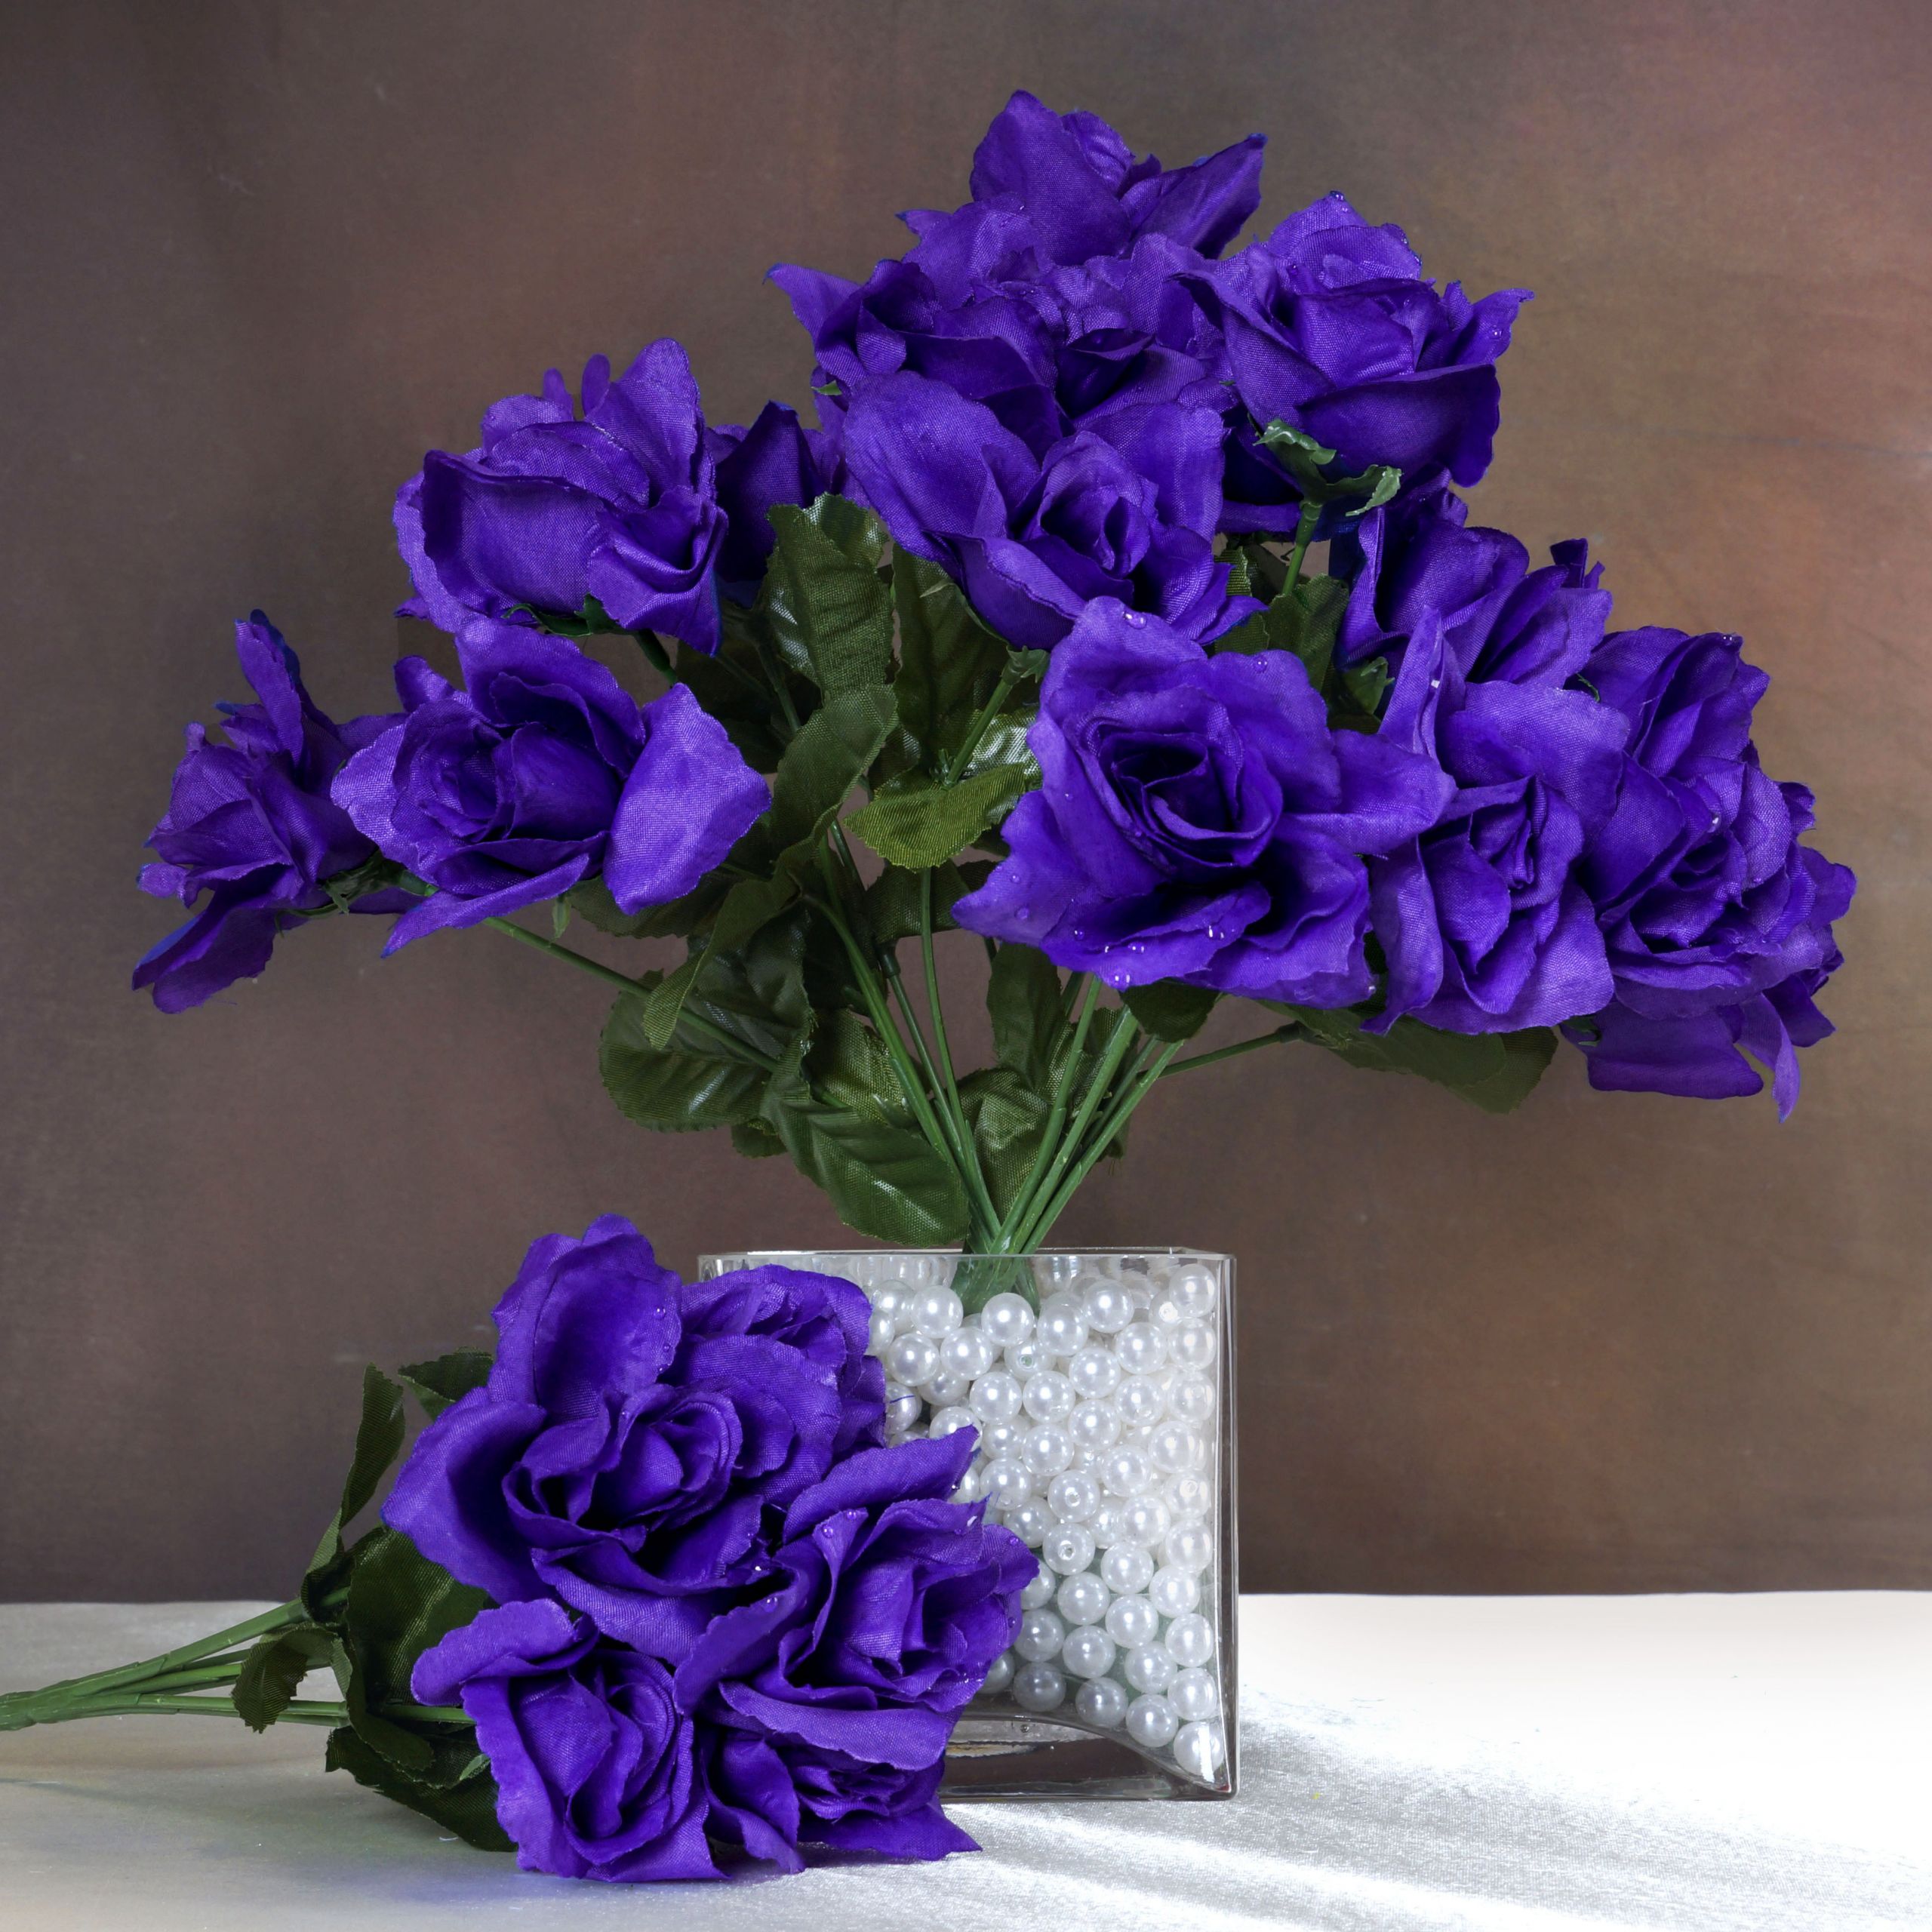 Wholesale Flowers For Weddings
 168 Silk OPEN ROSES WEDDING Bouquets FLOWERS Centerpieces